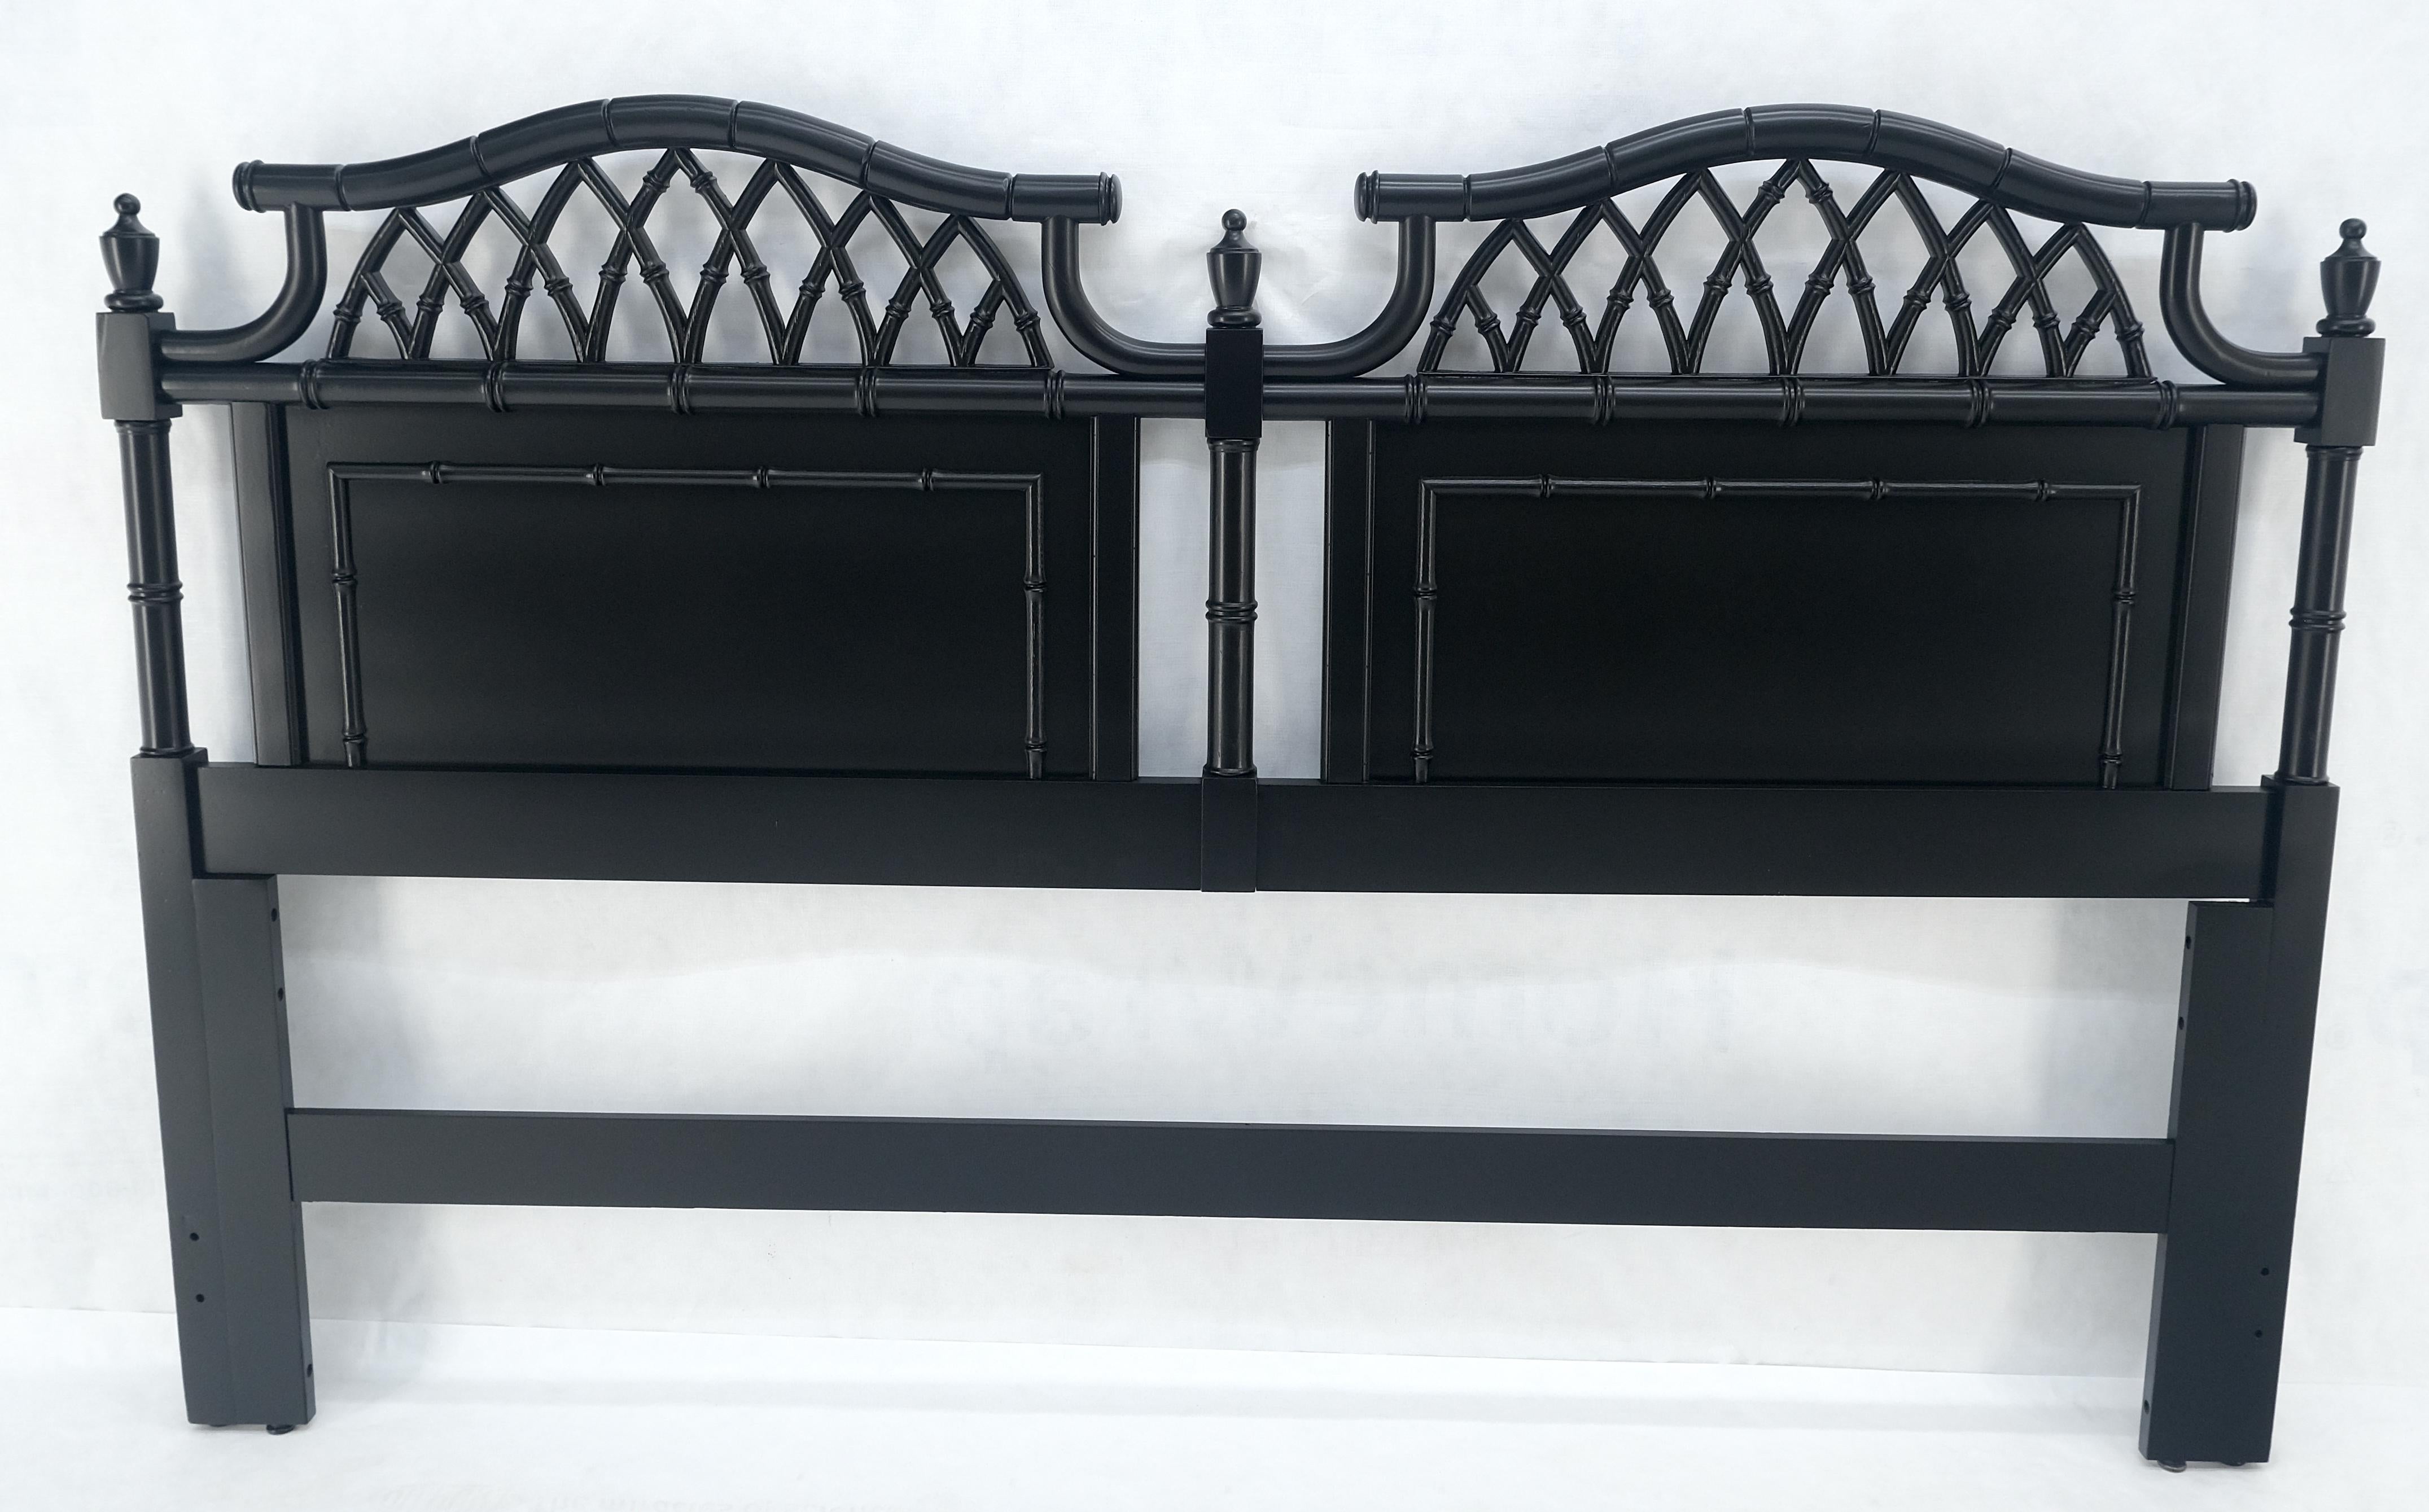 Faux Bamboo Black Lacquer King Size Headboard Bed MINT!
Inspected mint vintage condition!